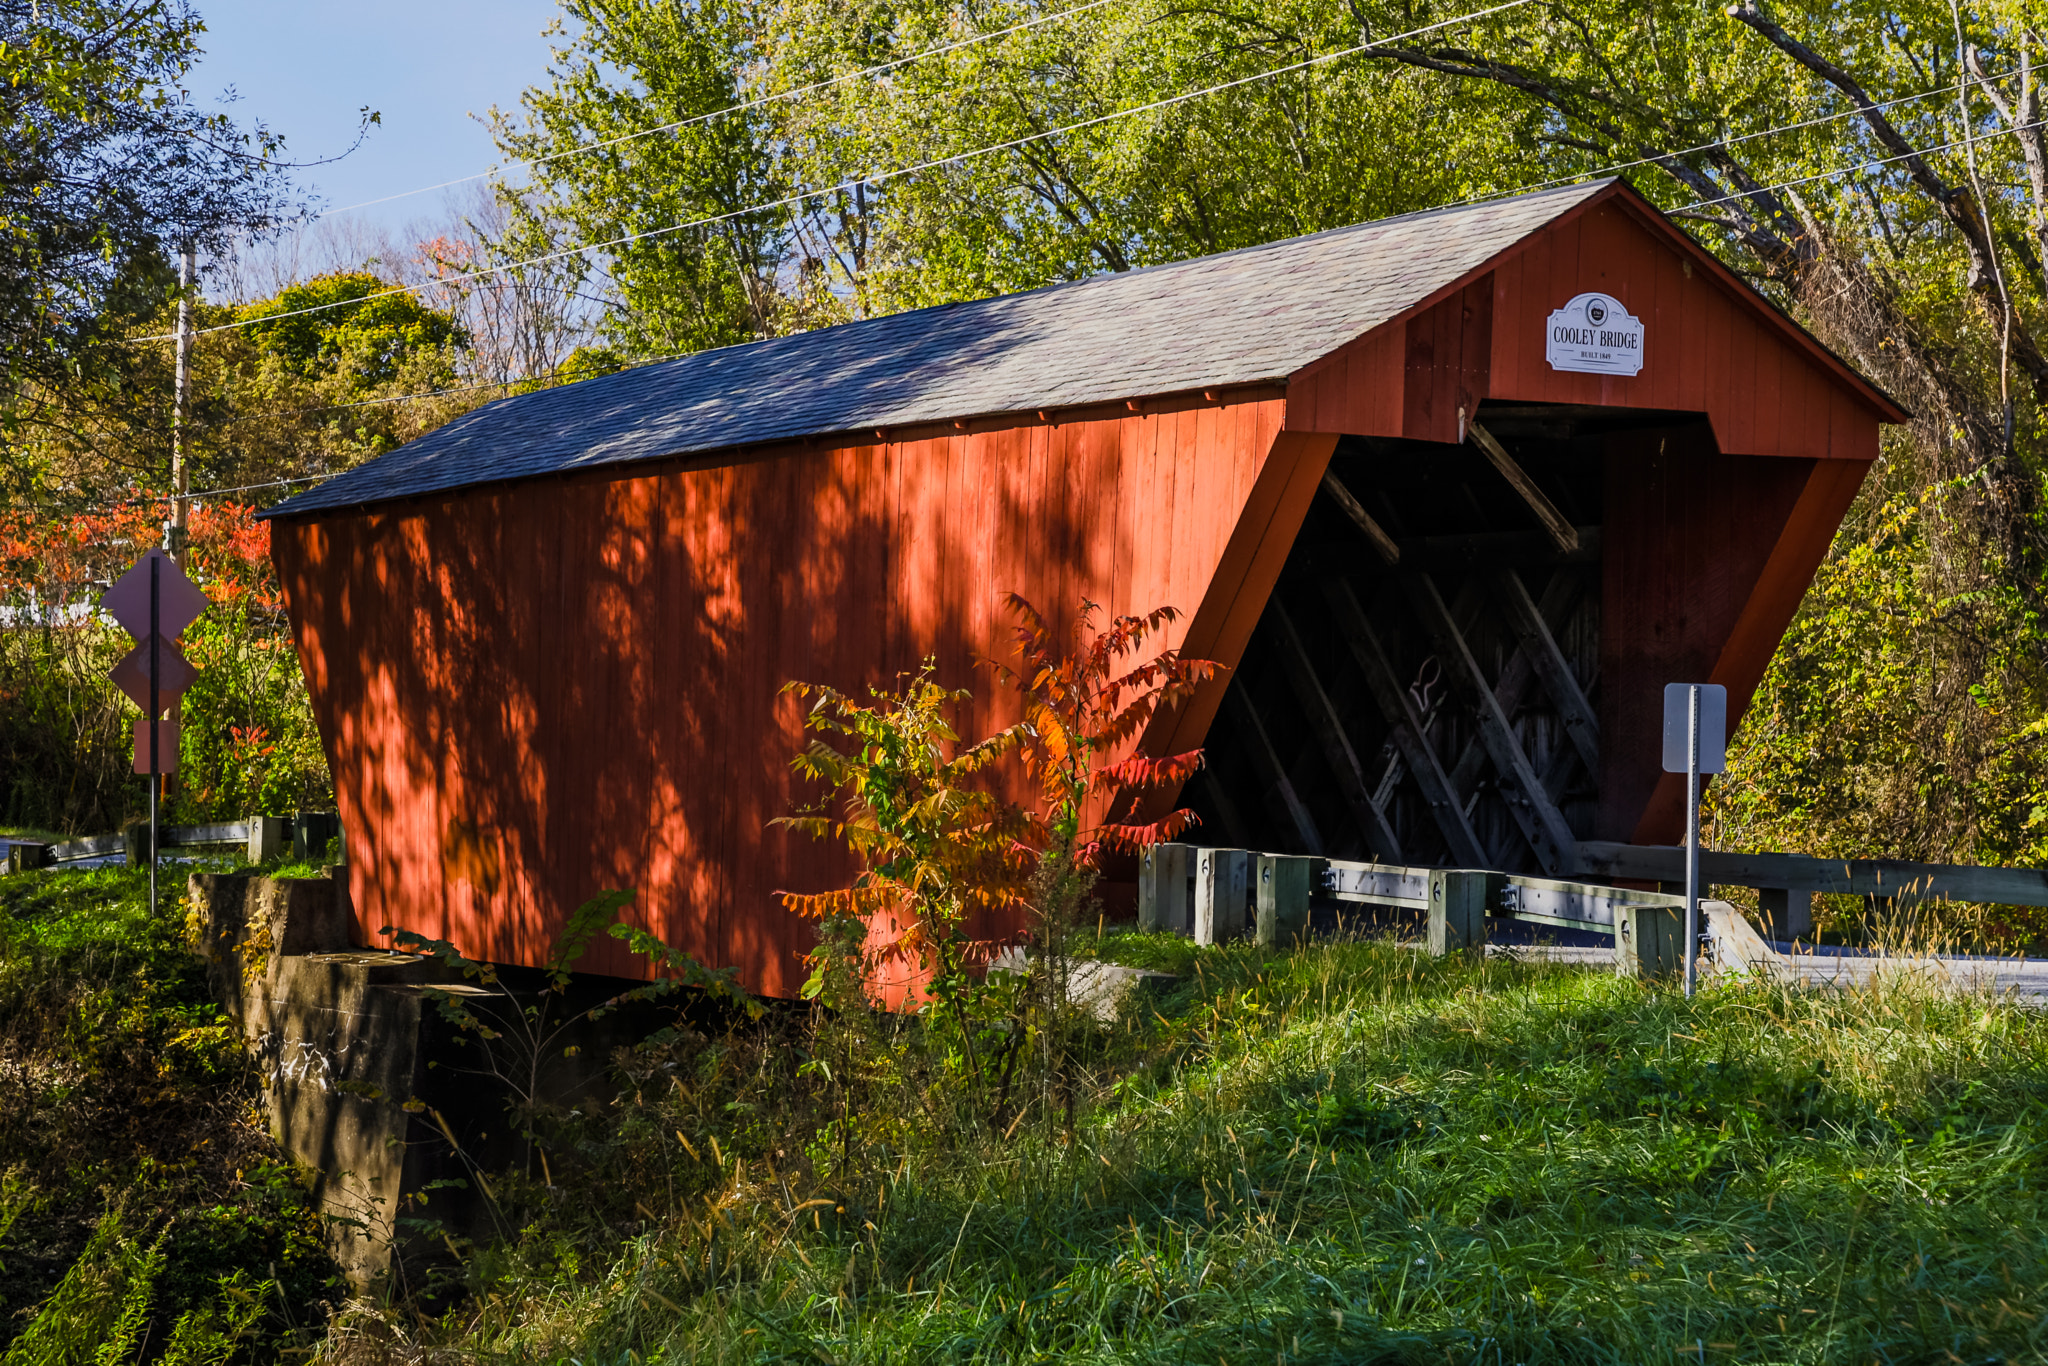 VT-PITTSFORD-COOLEY COVERED BRIDGE